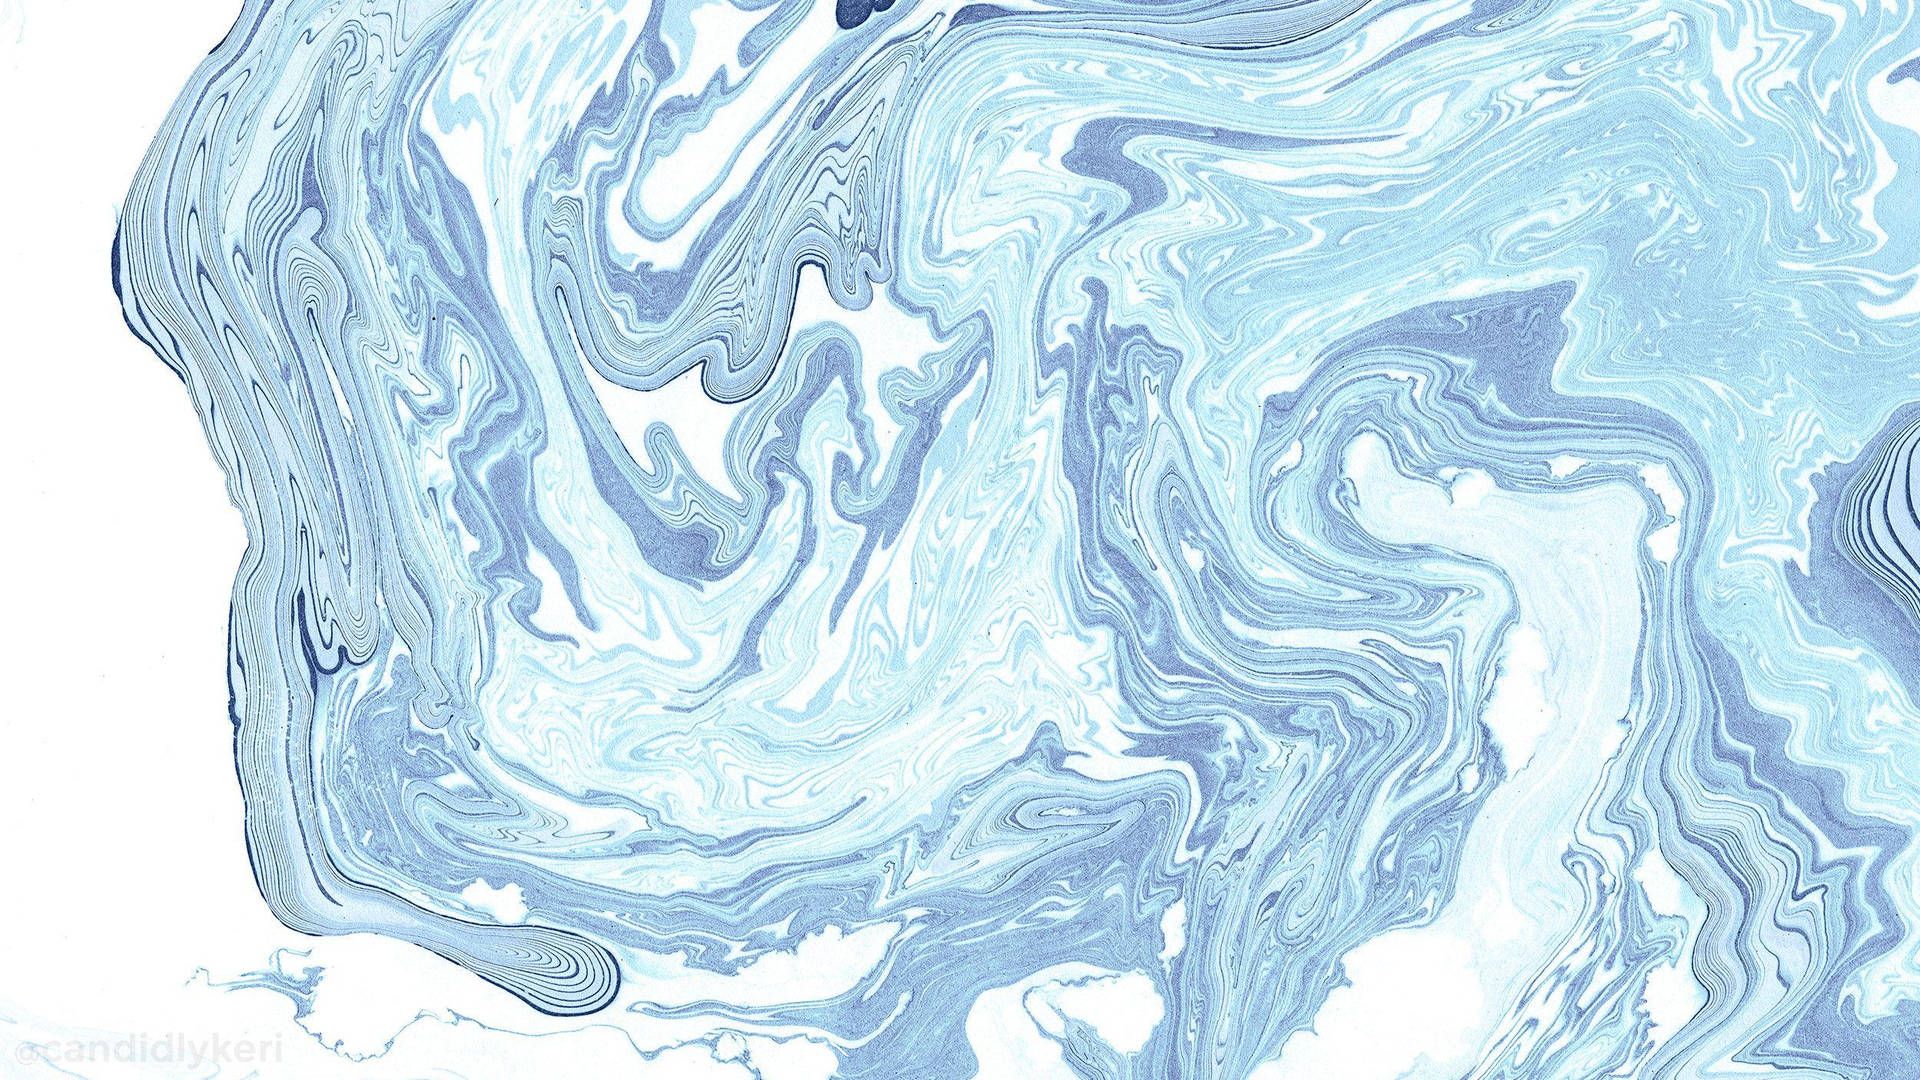 A close up of some blue and white marble - MacBook